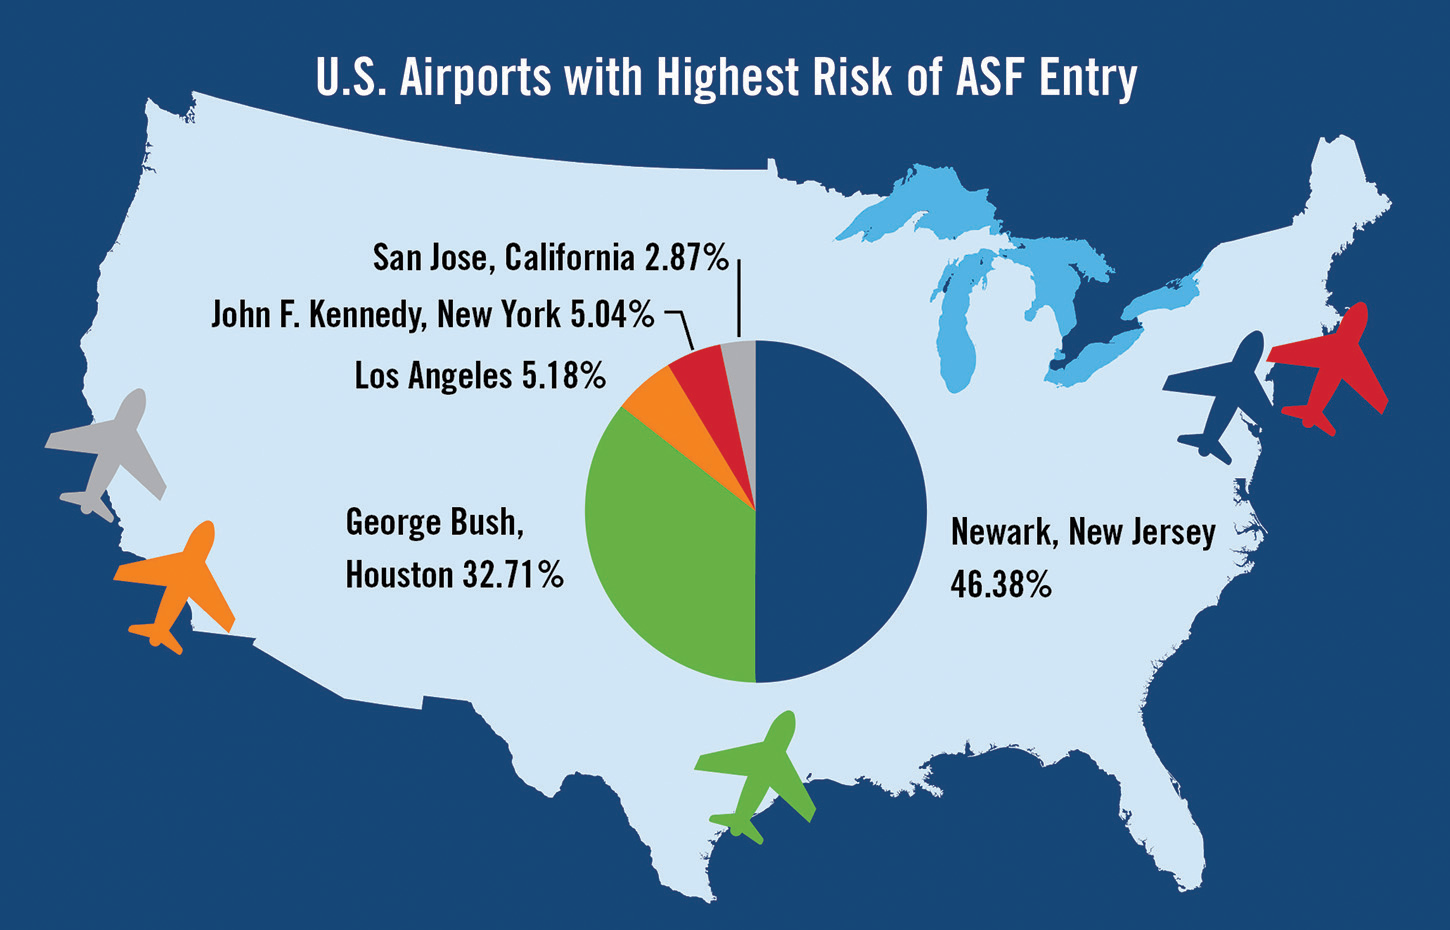 Map of contiguous USA showing Newark (48.38%) and Houston (32.71%) among airports with highest risk of ASF entry